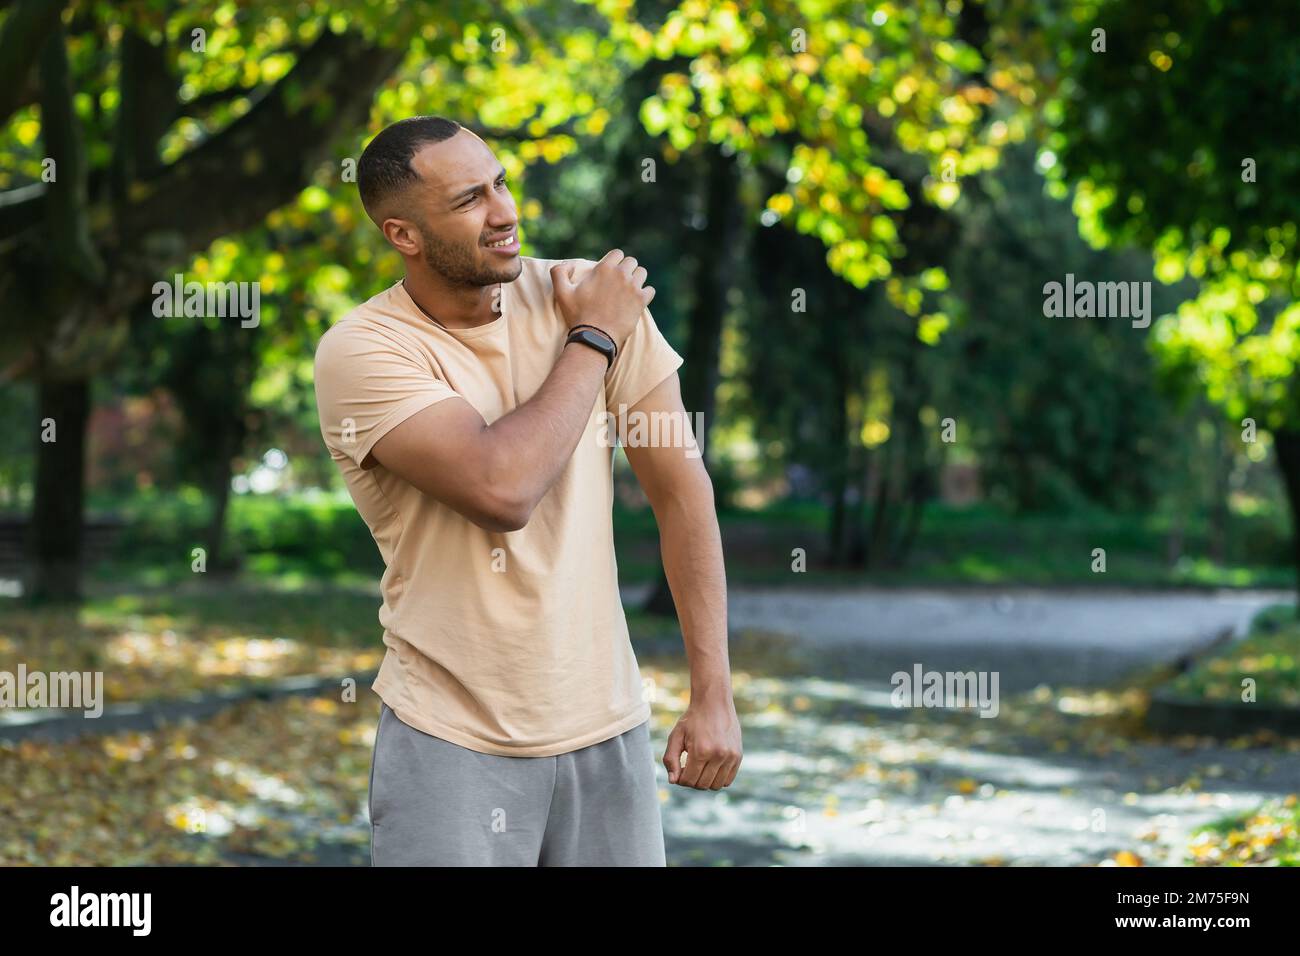 A man injured his shoulder during a fitness class, an African-American man injured himself while jogging in the park, stretches his arm and massages his sore muscles. Stock Photo